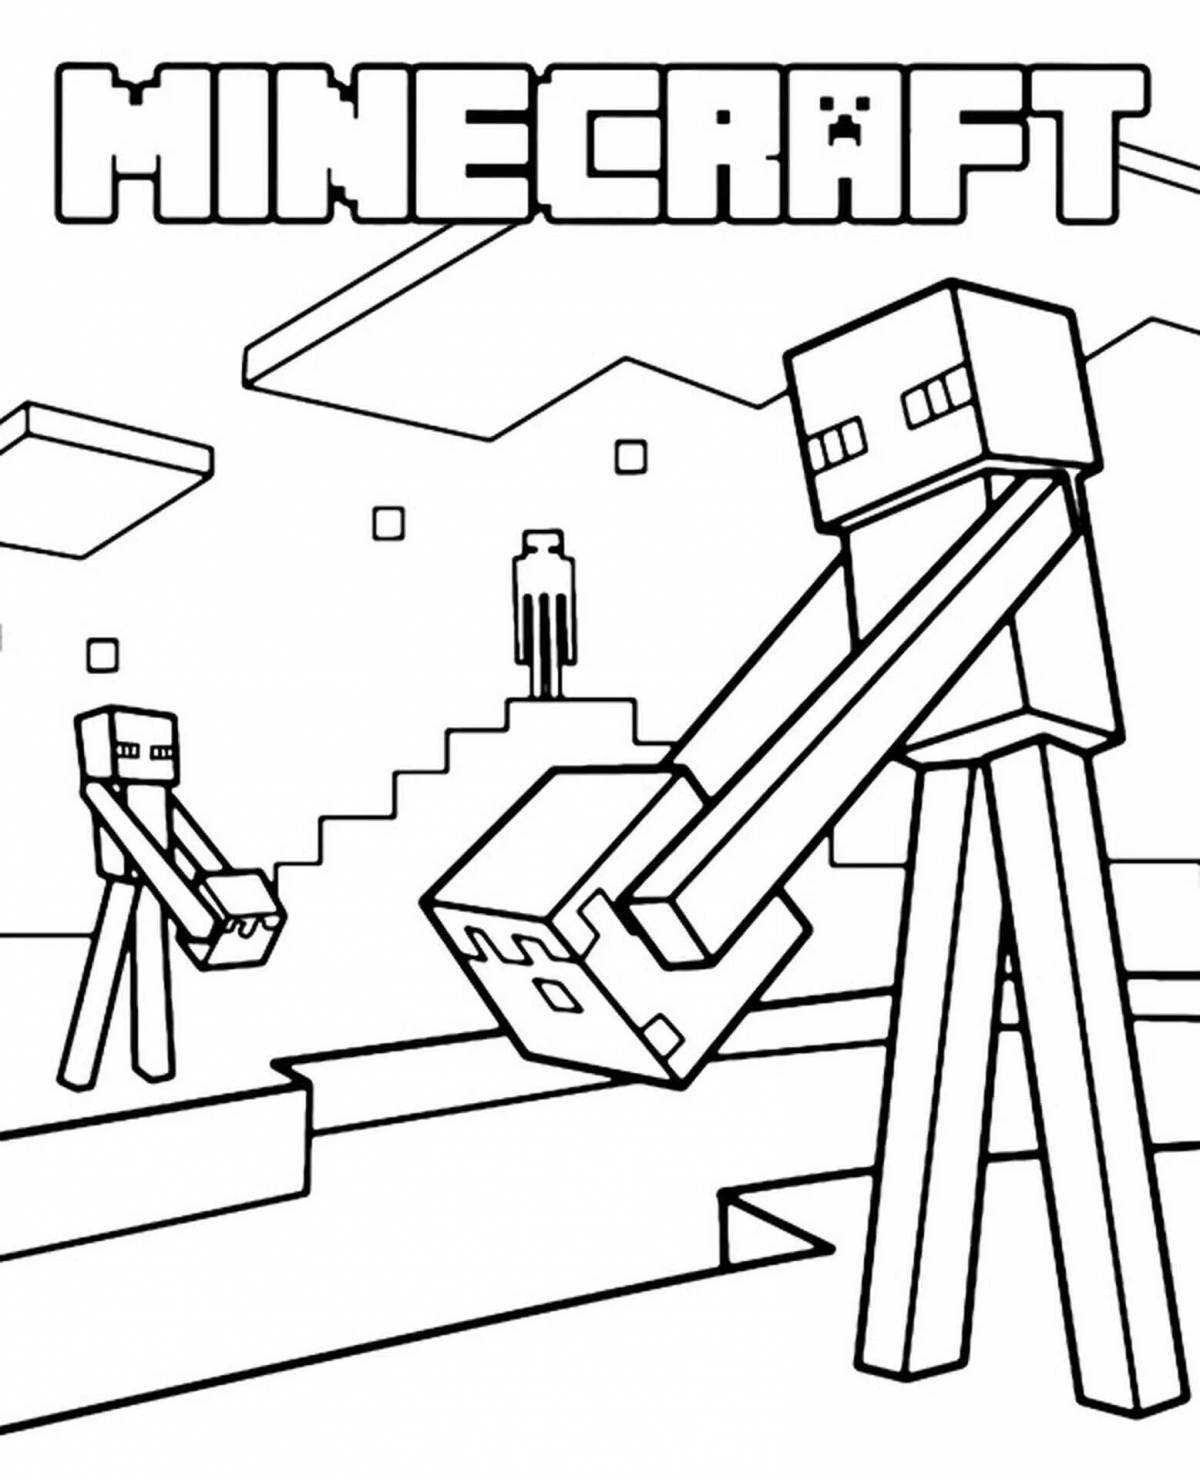 Coloring page for minecraft players